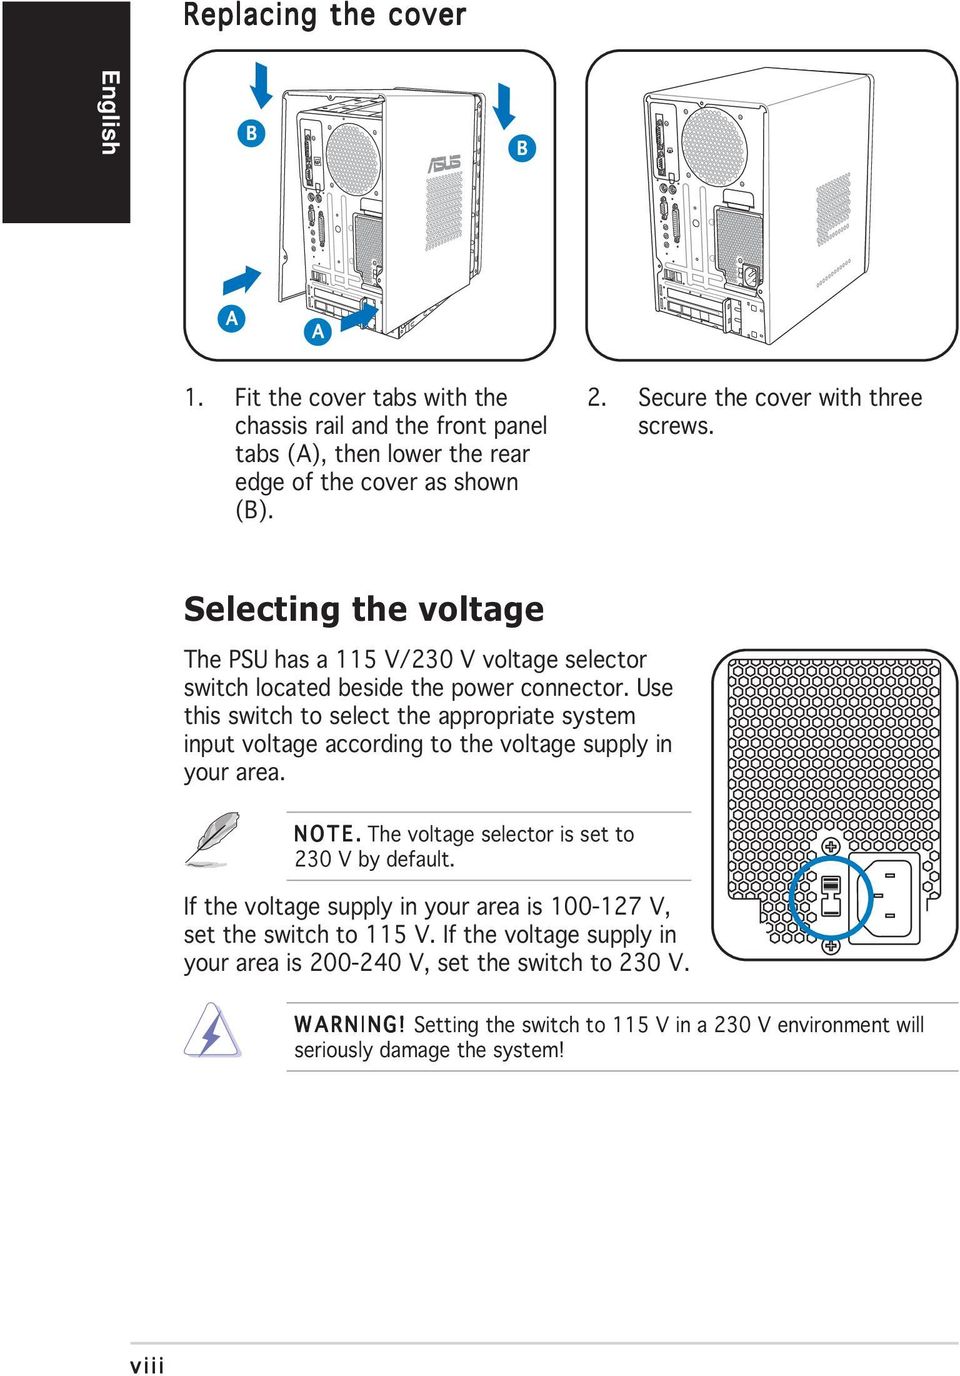 Use this switch to select the appropriate system input voltage according to the voltage supply in your area. NOTE. The voltage selector is set to 230 V by default.